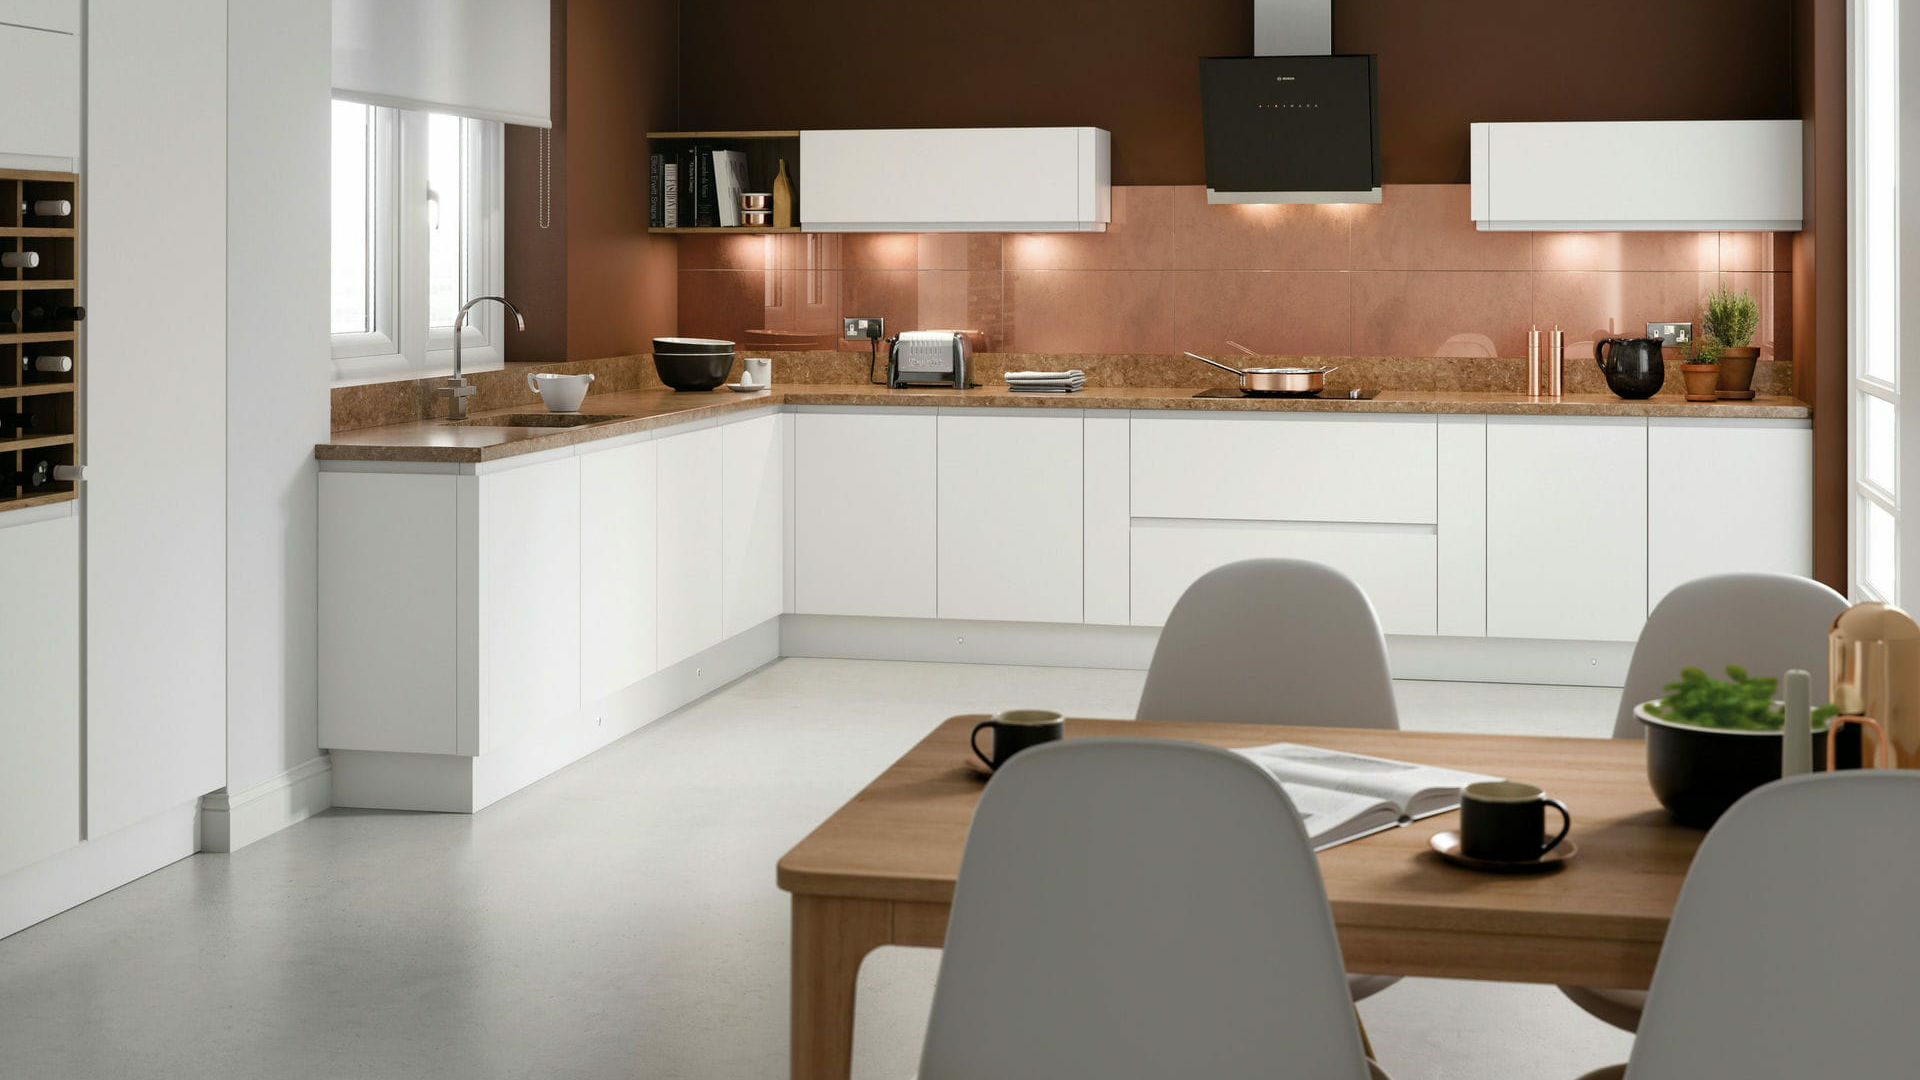 Stylish handleless matt white kitchens, ideal for a clean, streamlined kitchen look